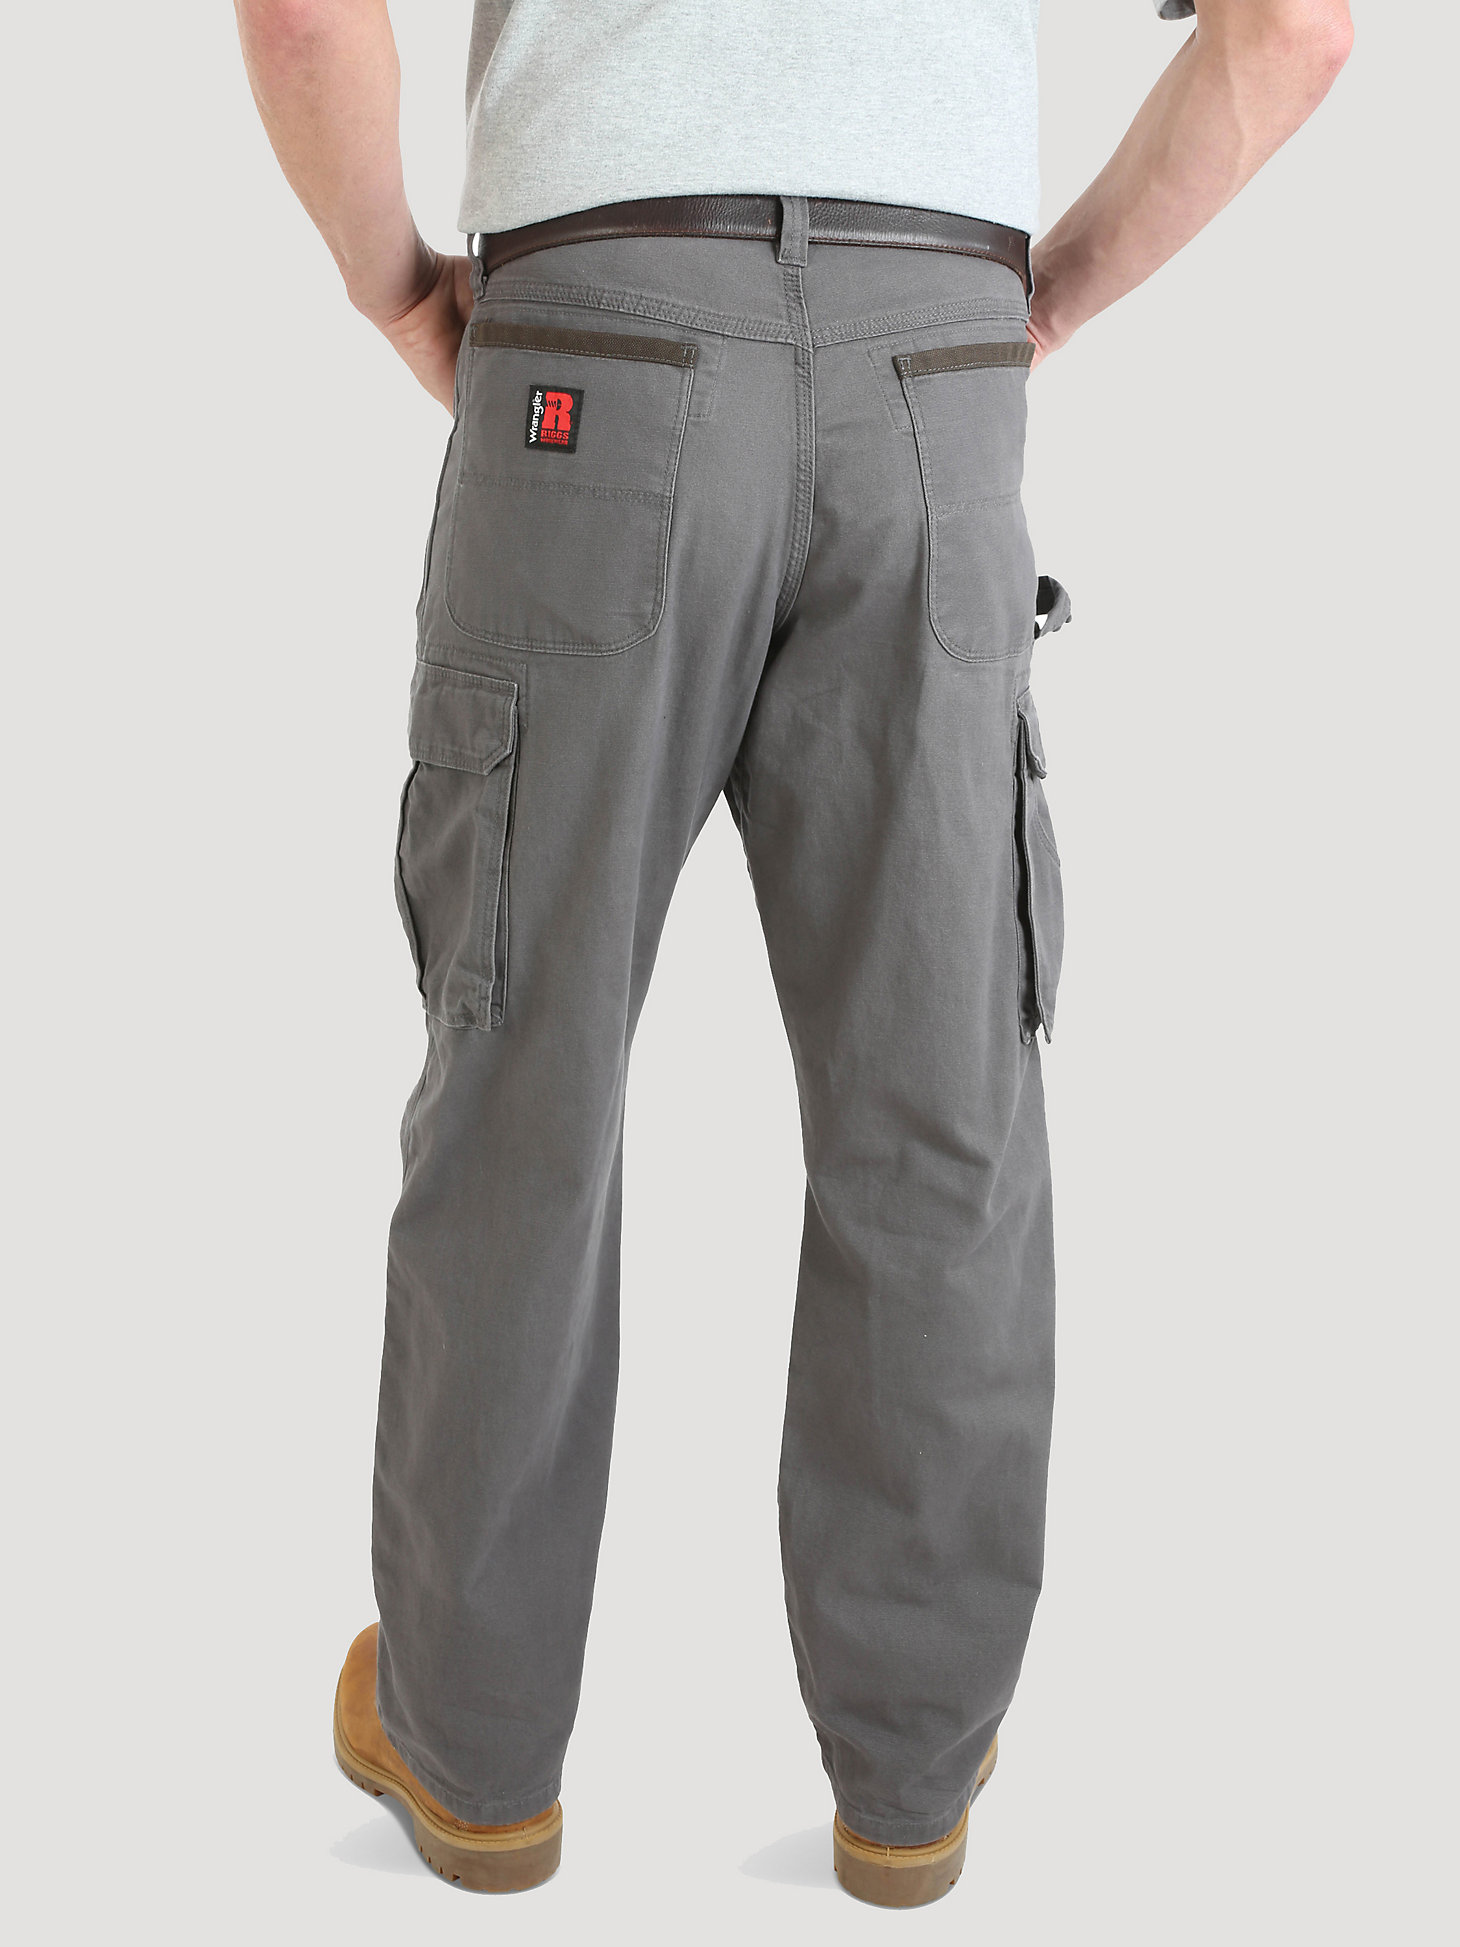 Wrangler® RIGGS Workwear® Advanced Comfort Lightweight Ranger Pant in Charcoal alternative view 3